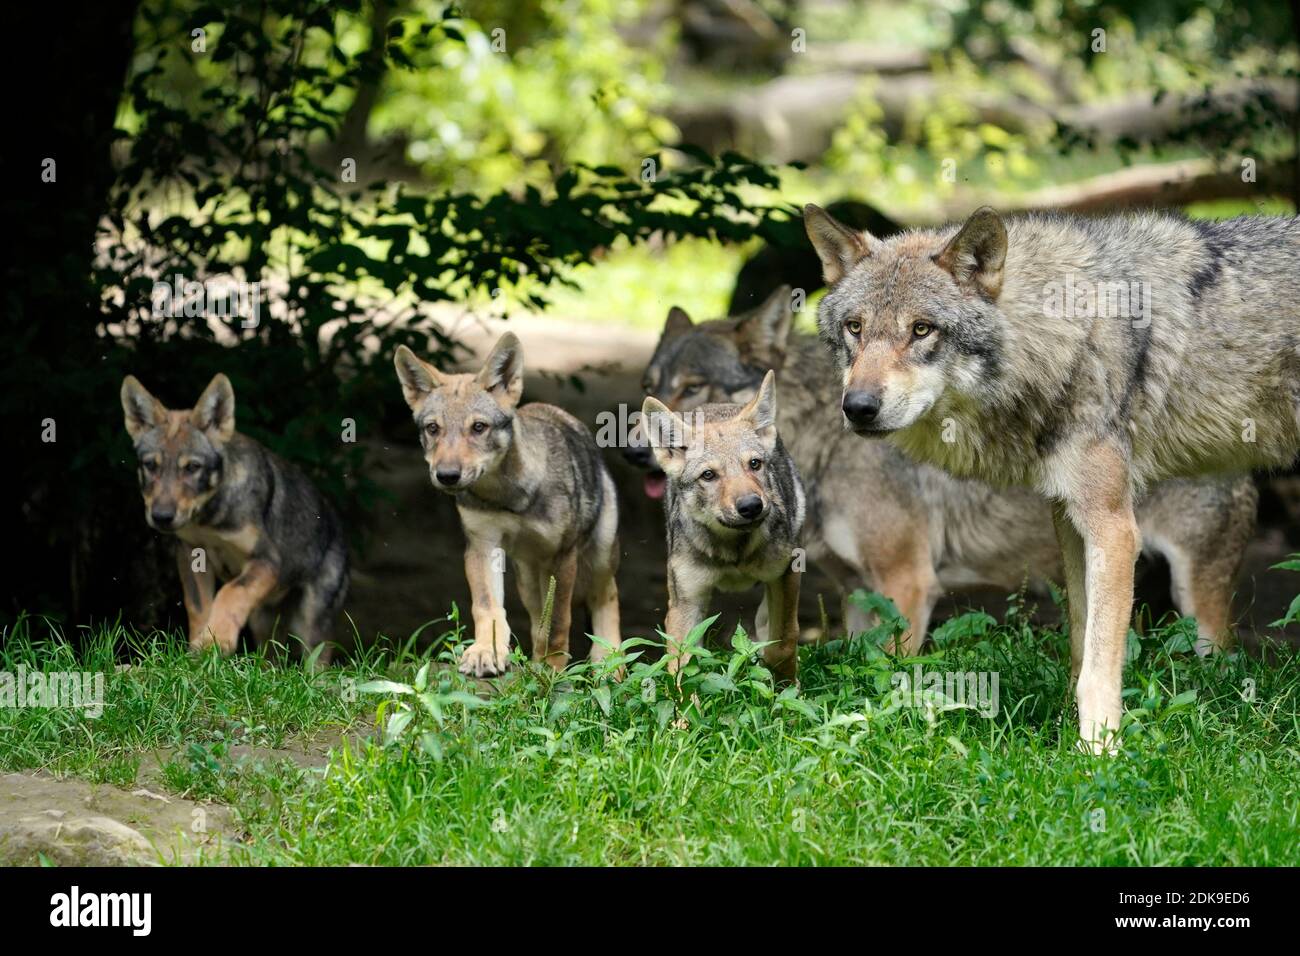 European wolf (Canis lupus), puppy with adult, France Stock Photo